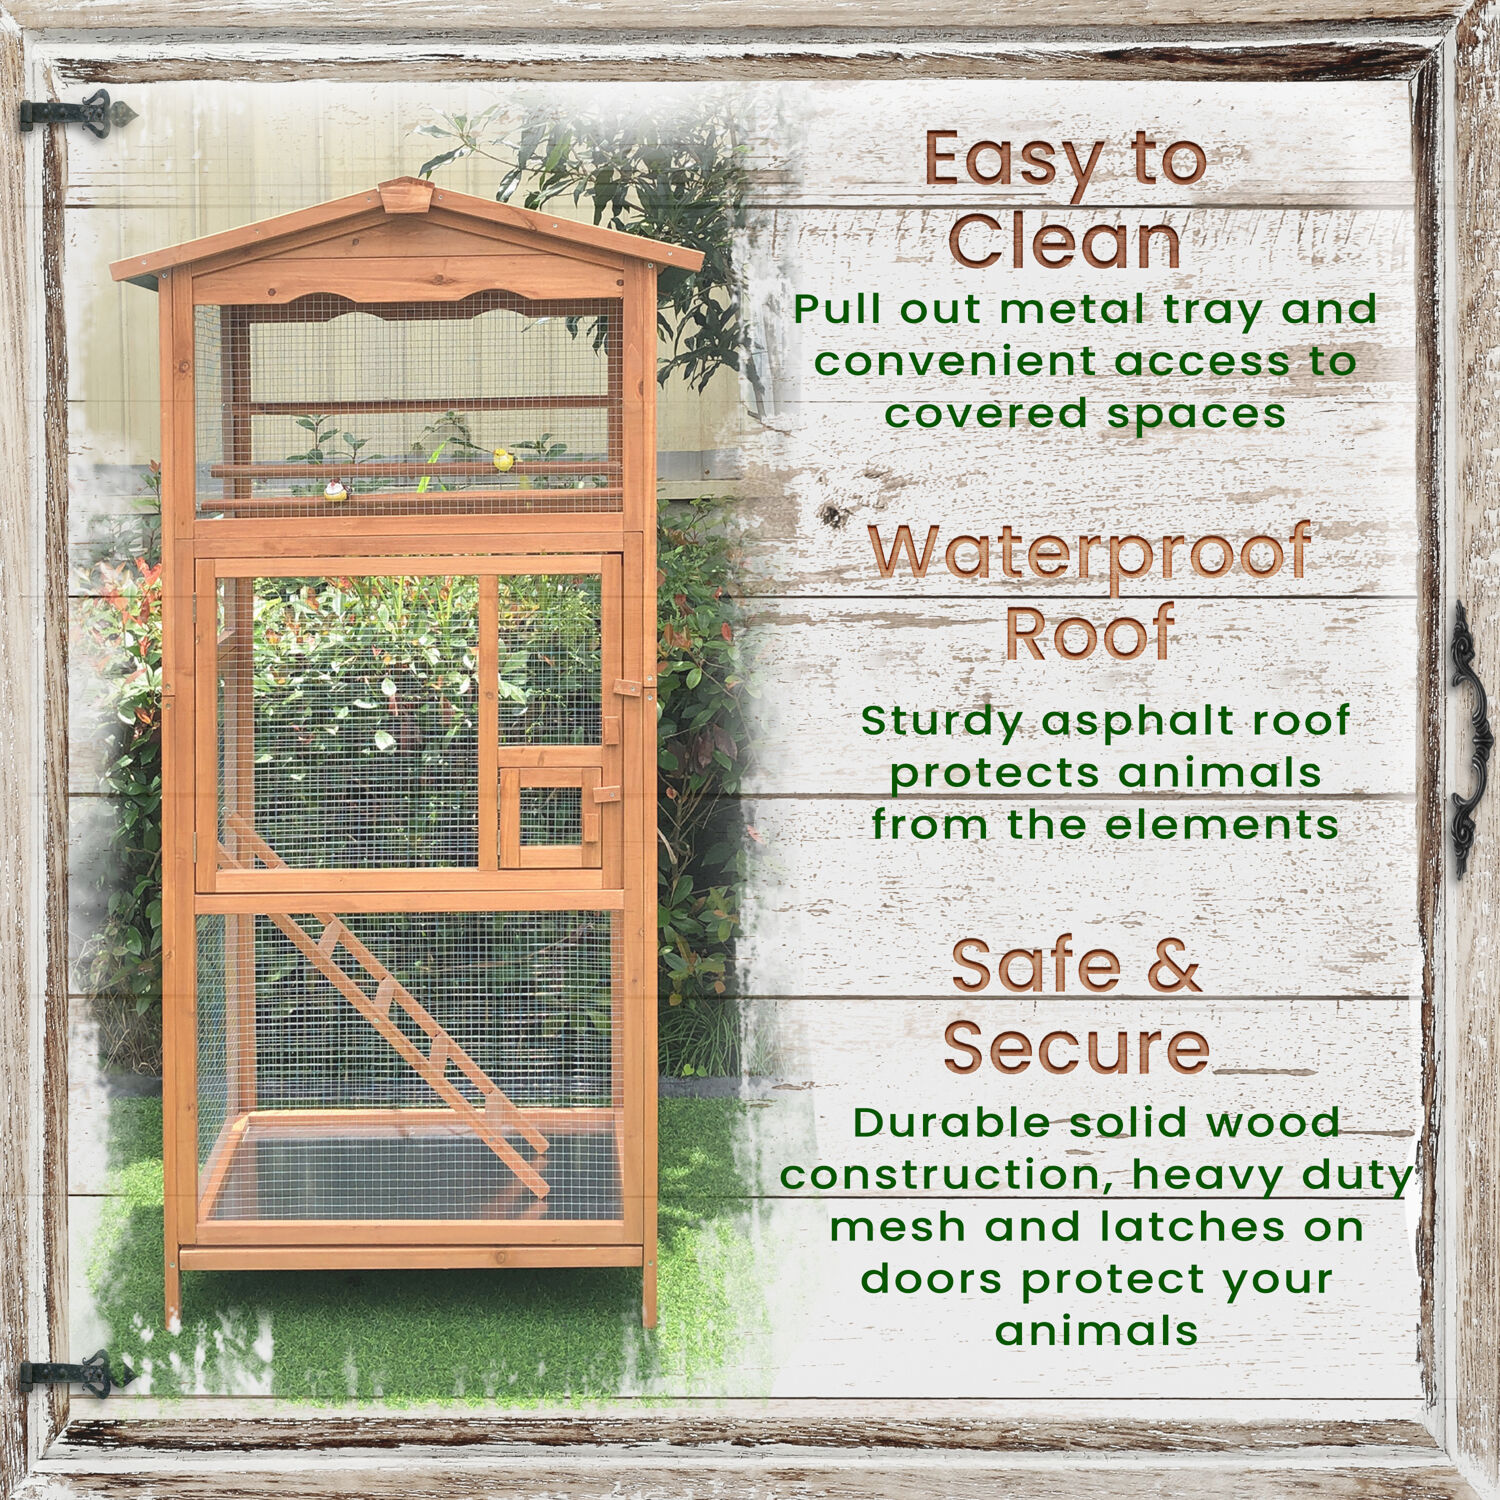 Hanover Outdoor Wooden Bird Cage with 3 Resting Bars, Ladder, Waterproof Roof and Removable Tray, 2.9 Ft. x 2.1 Ft. x 5.8 Ft. - image 2 of 12